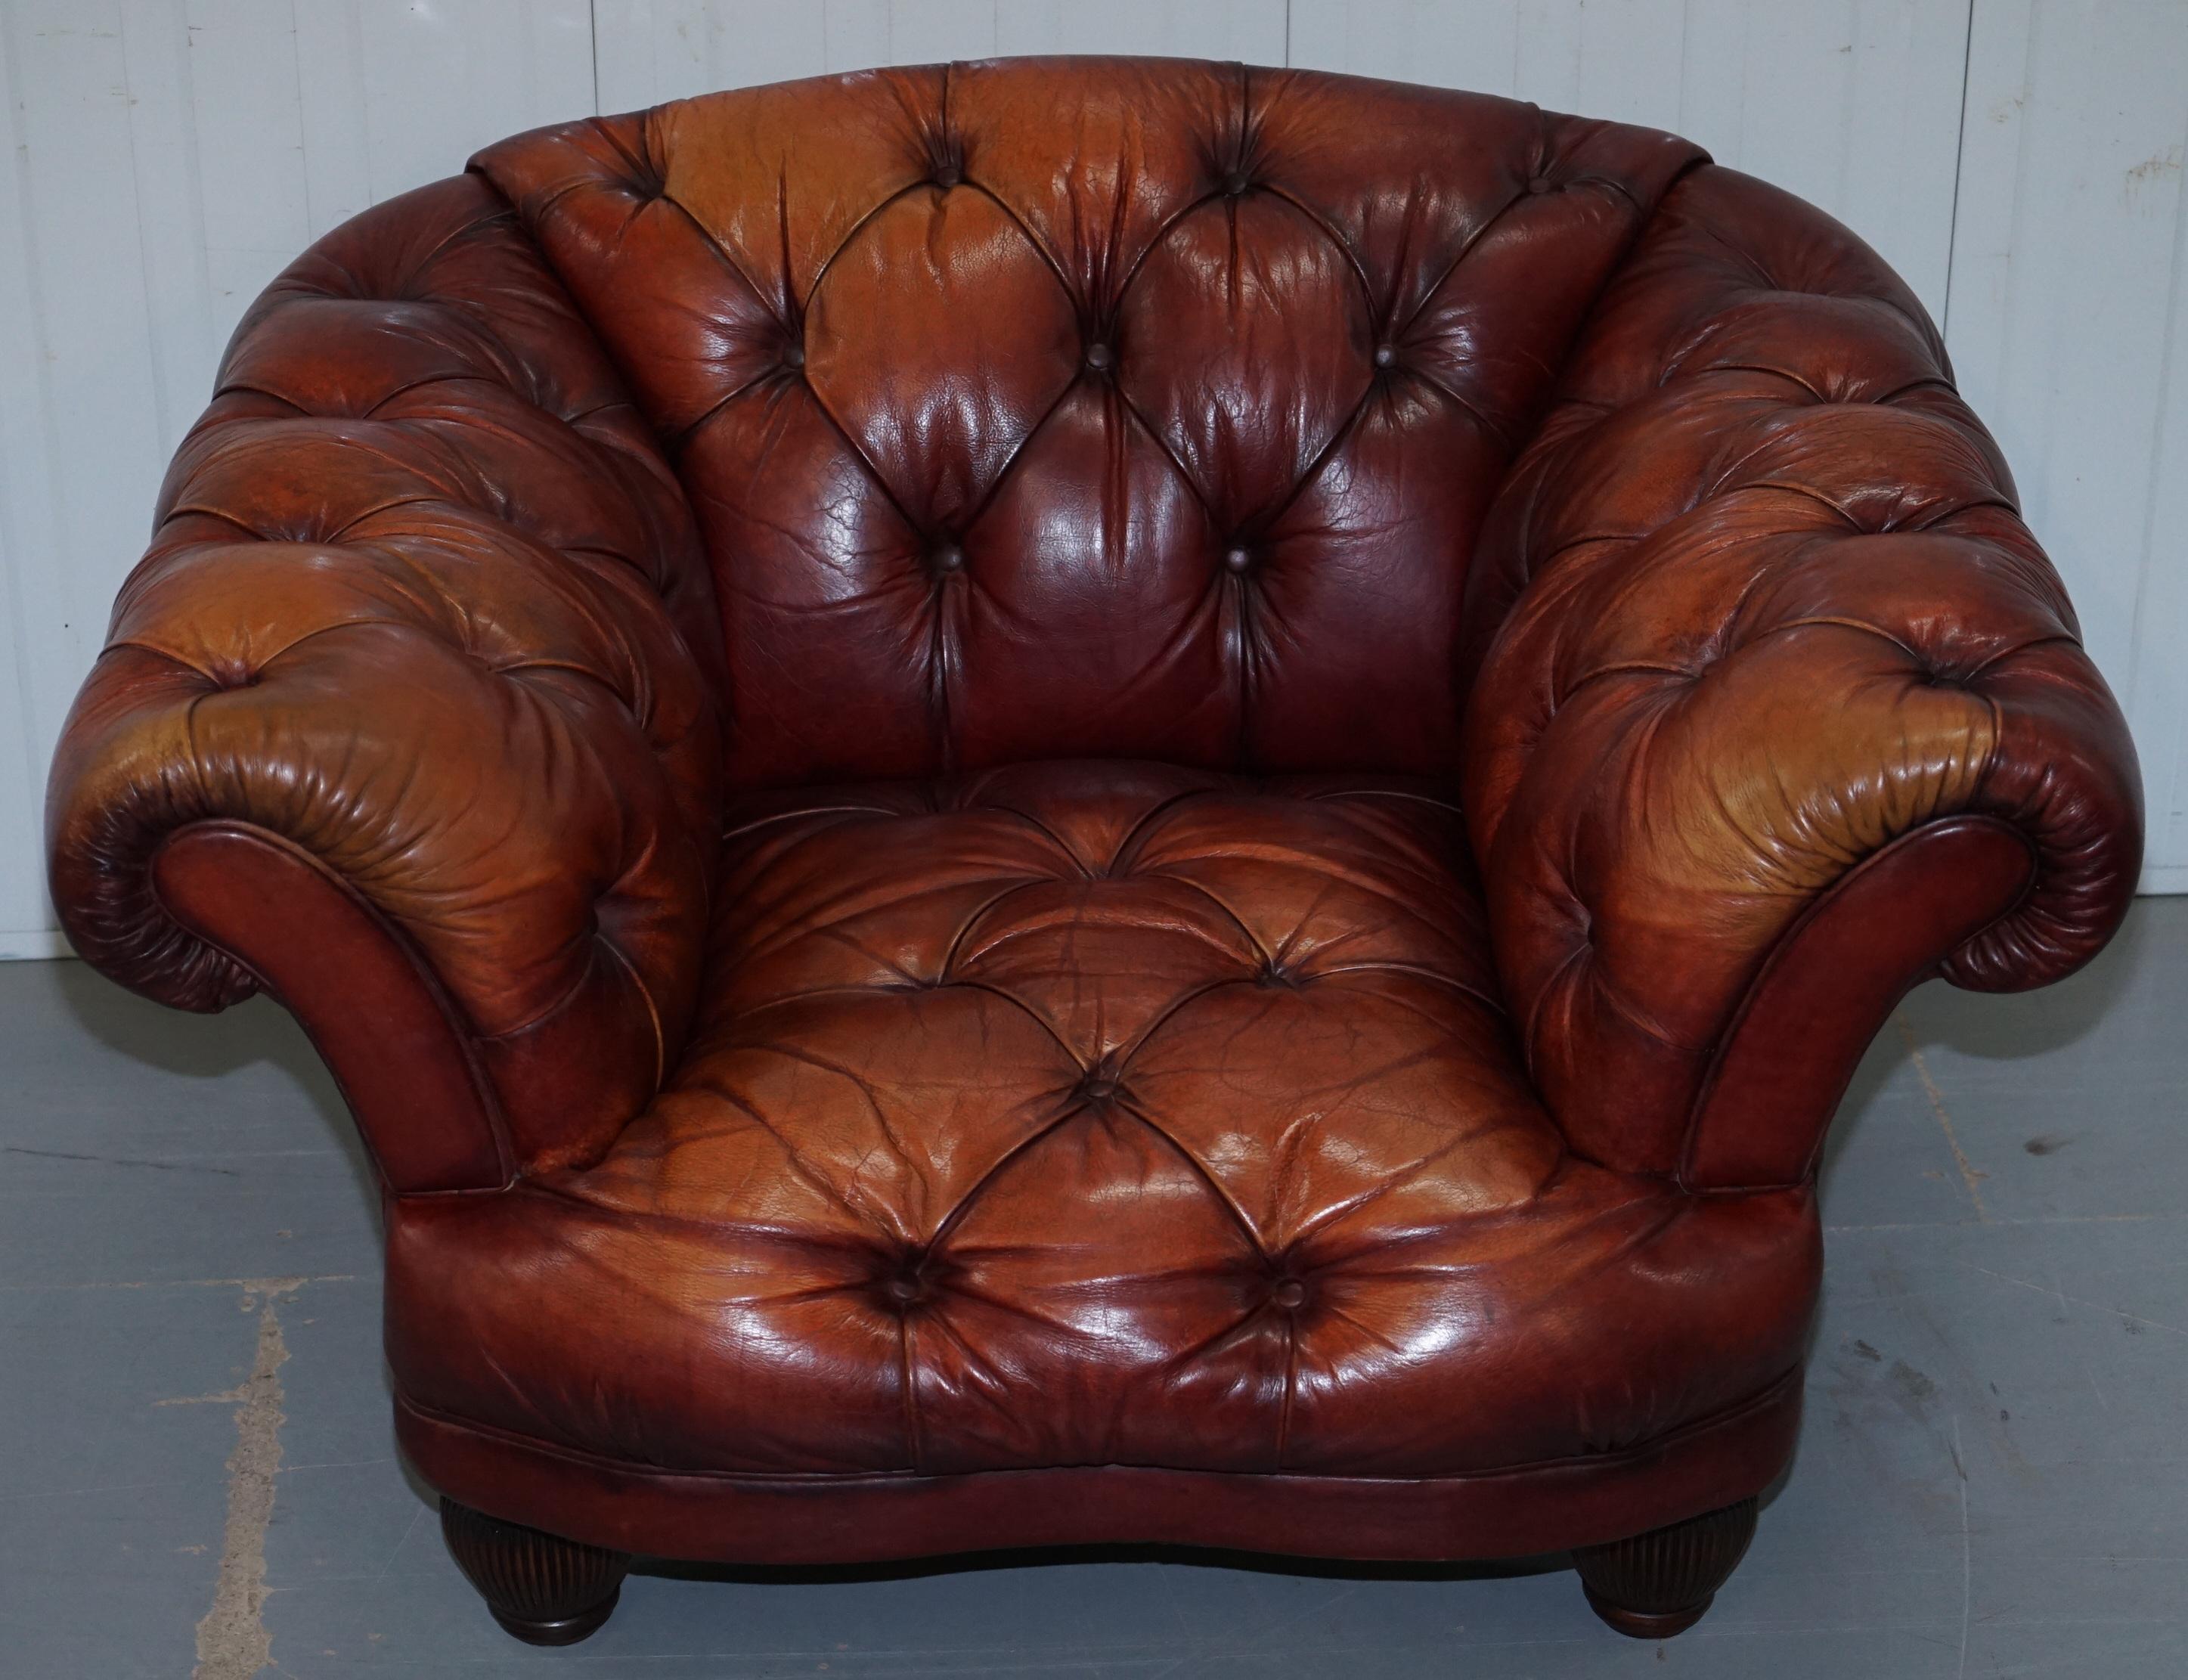 Wimbledon-Furniture

Wimbledon-Furniture is delighted to offer for sale this lovely RRP £1099 Tetrad Oskar aged reddish brown leather Chesterfield buttoned armchair

I have the matching sofa listed under my other items

This range has to be one of